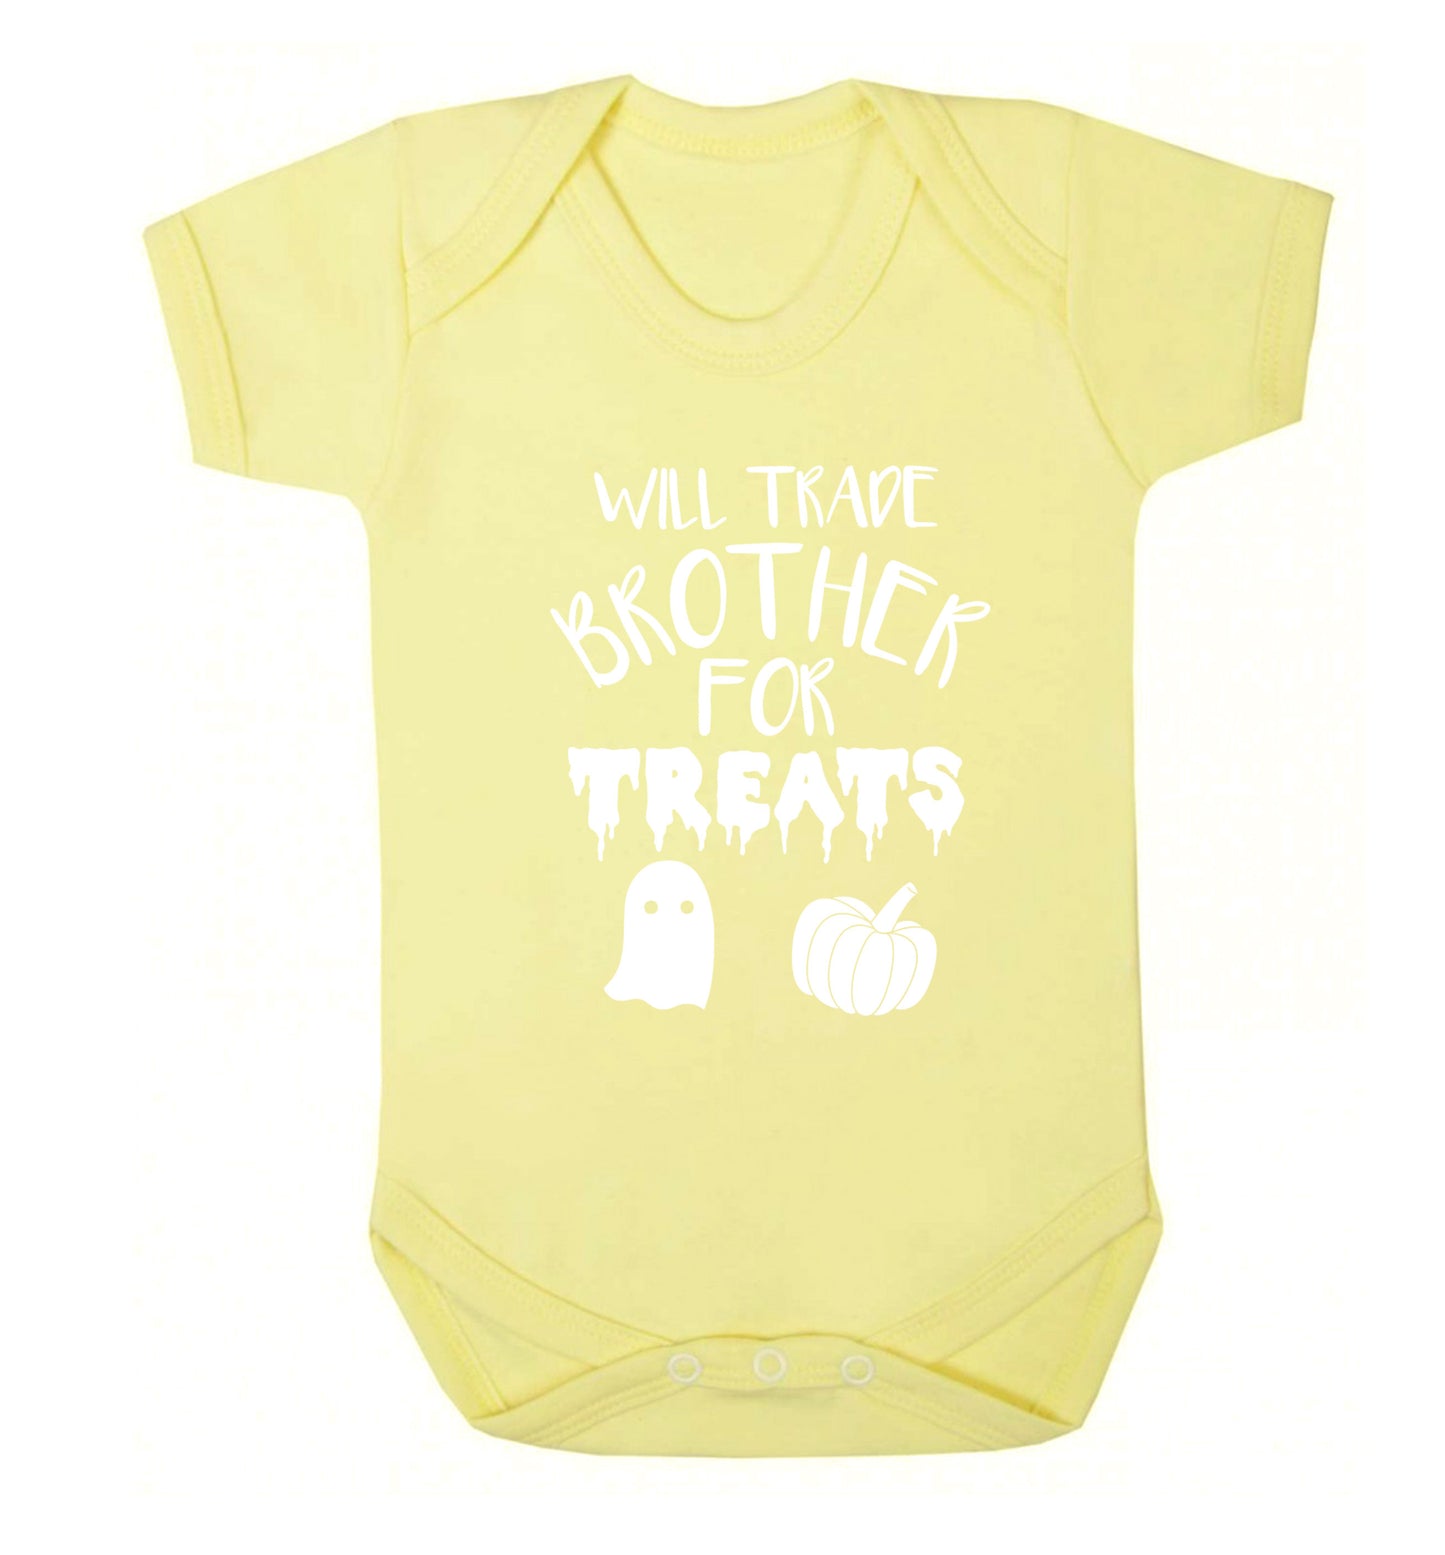 Will trade brother for treats Baby Vest pale yellow 18-24 months